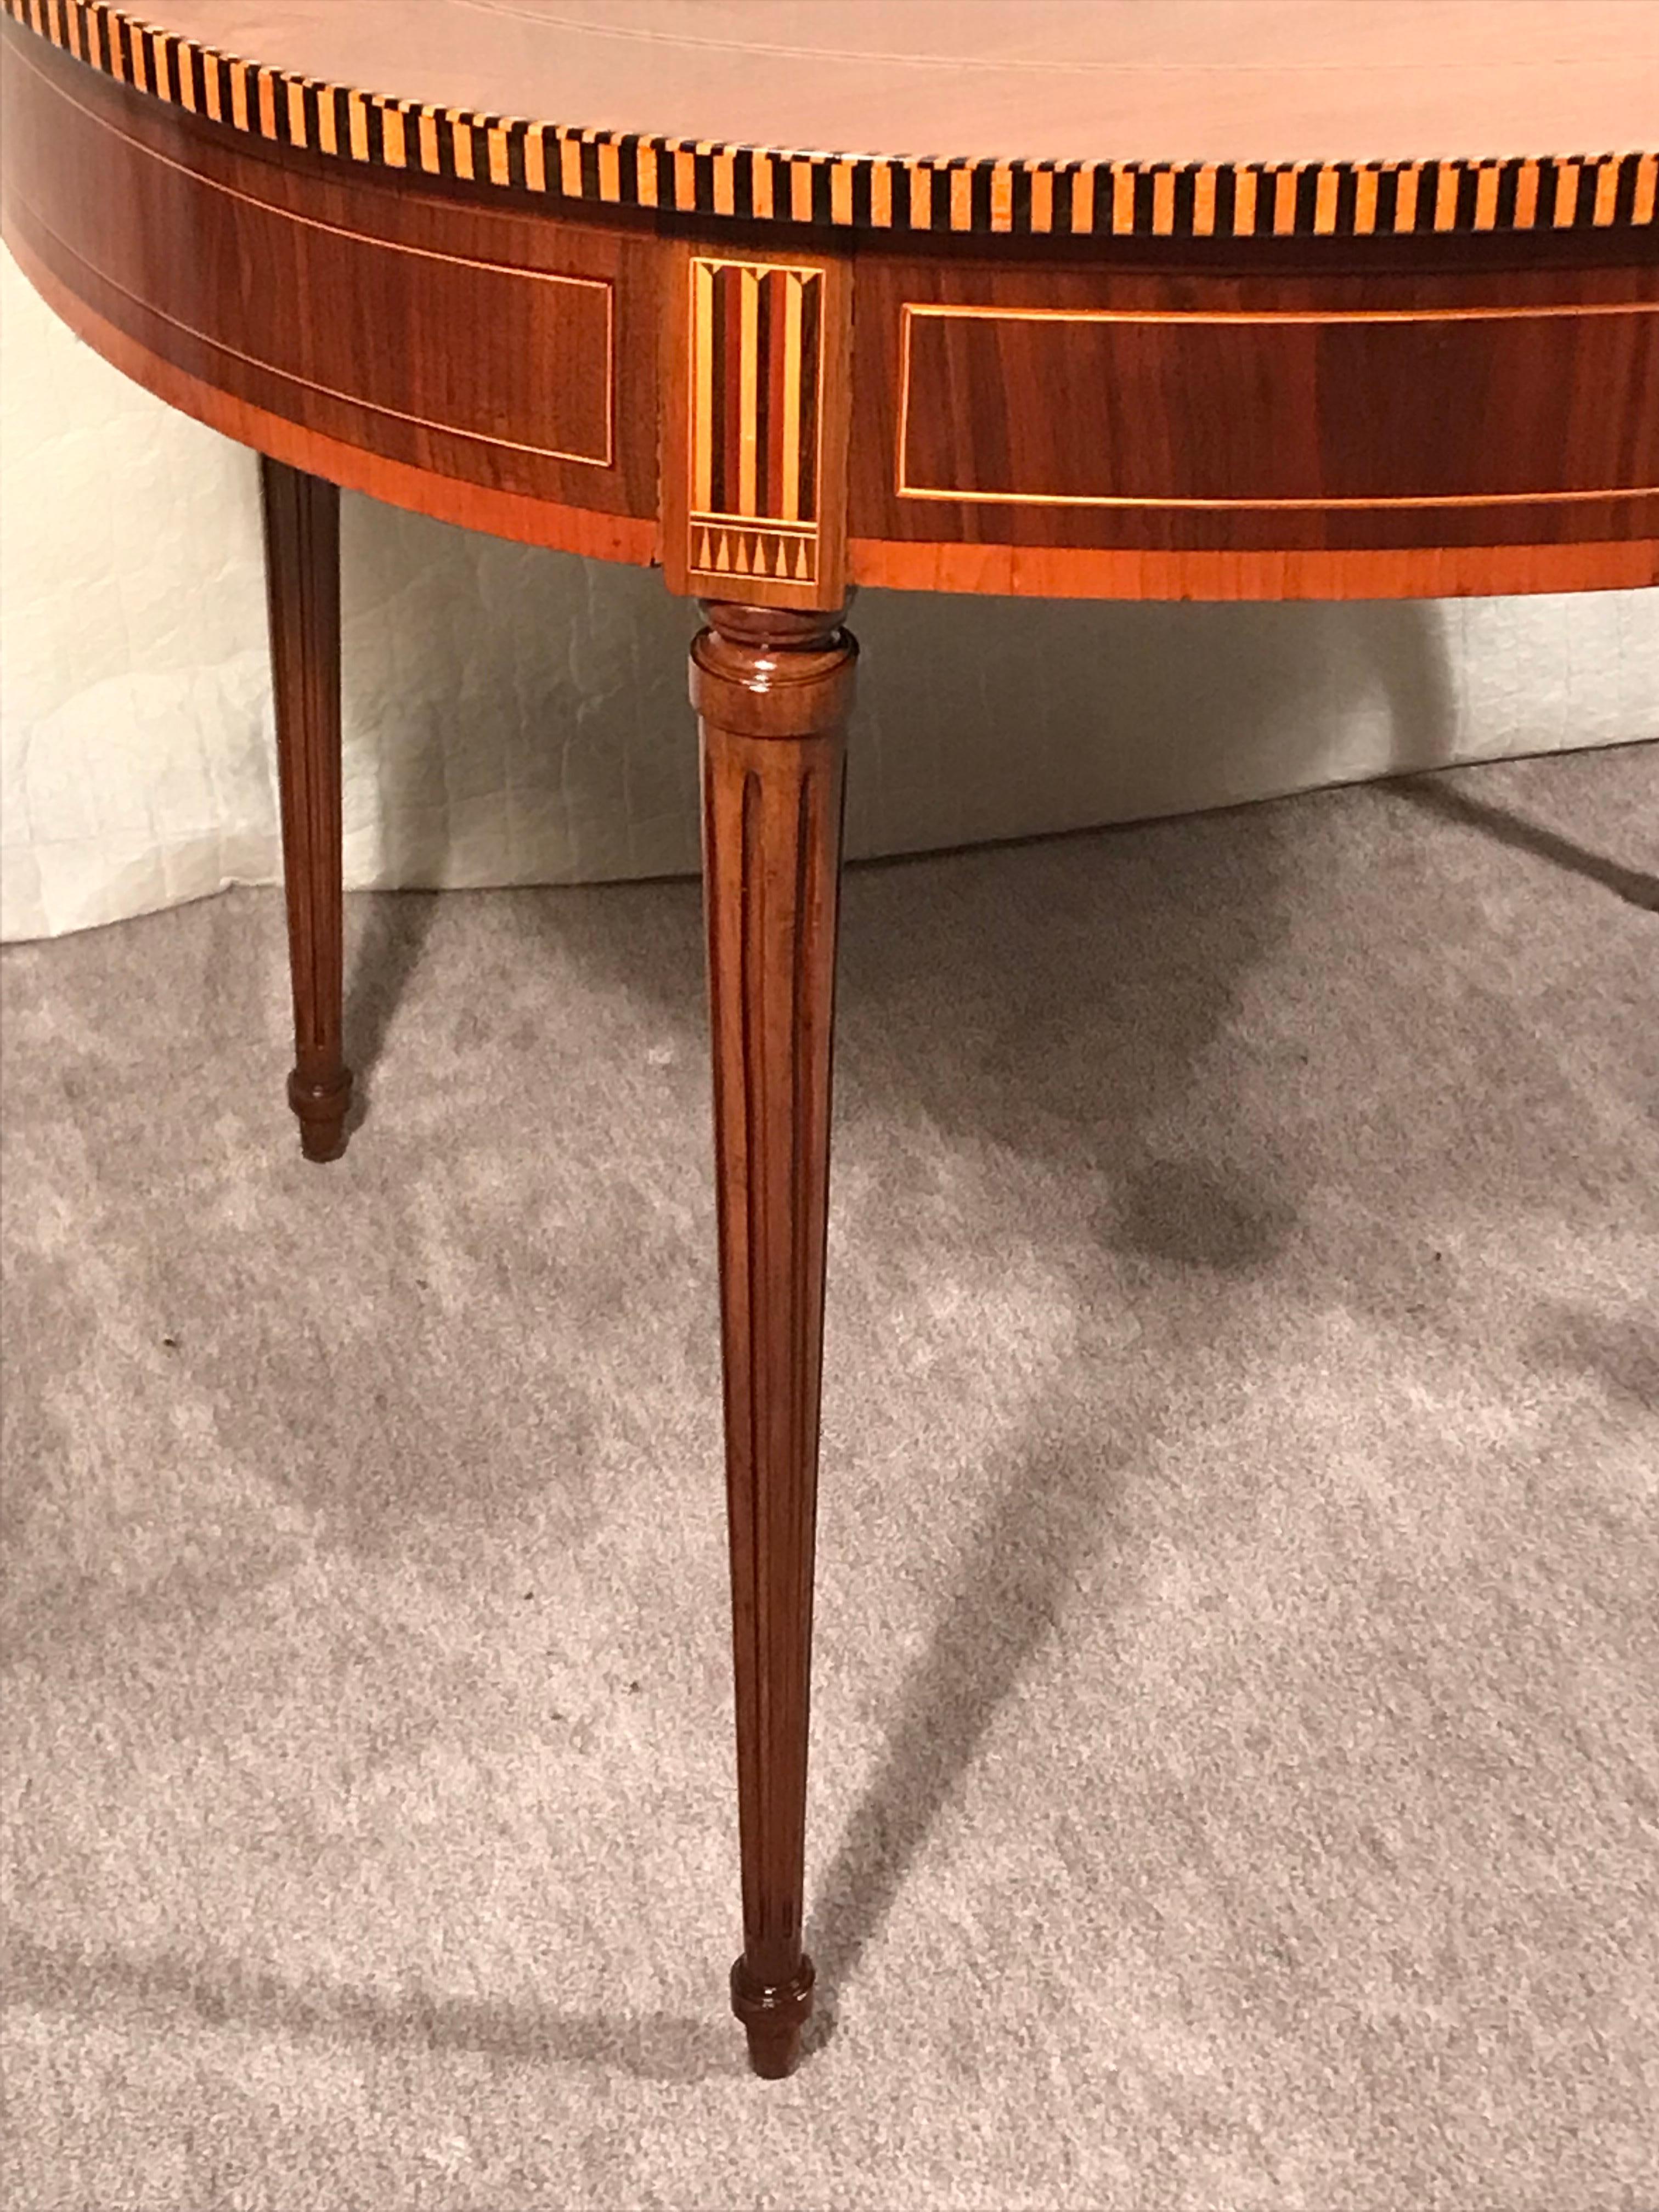 This original Louis XVI dining or center table dates back to 1780-1800. The oval table stands on four fluted legs and has a beautiful walnut veneer. The apron and the top of the table are additional decorated with intarsia. The table comes